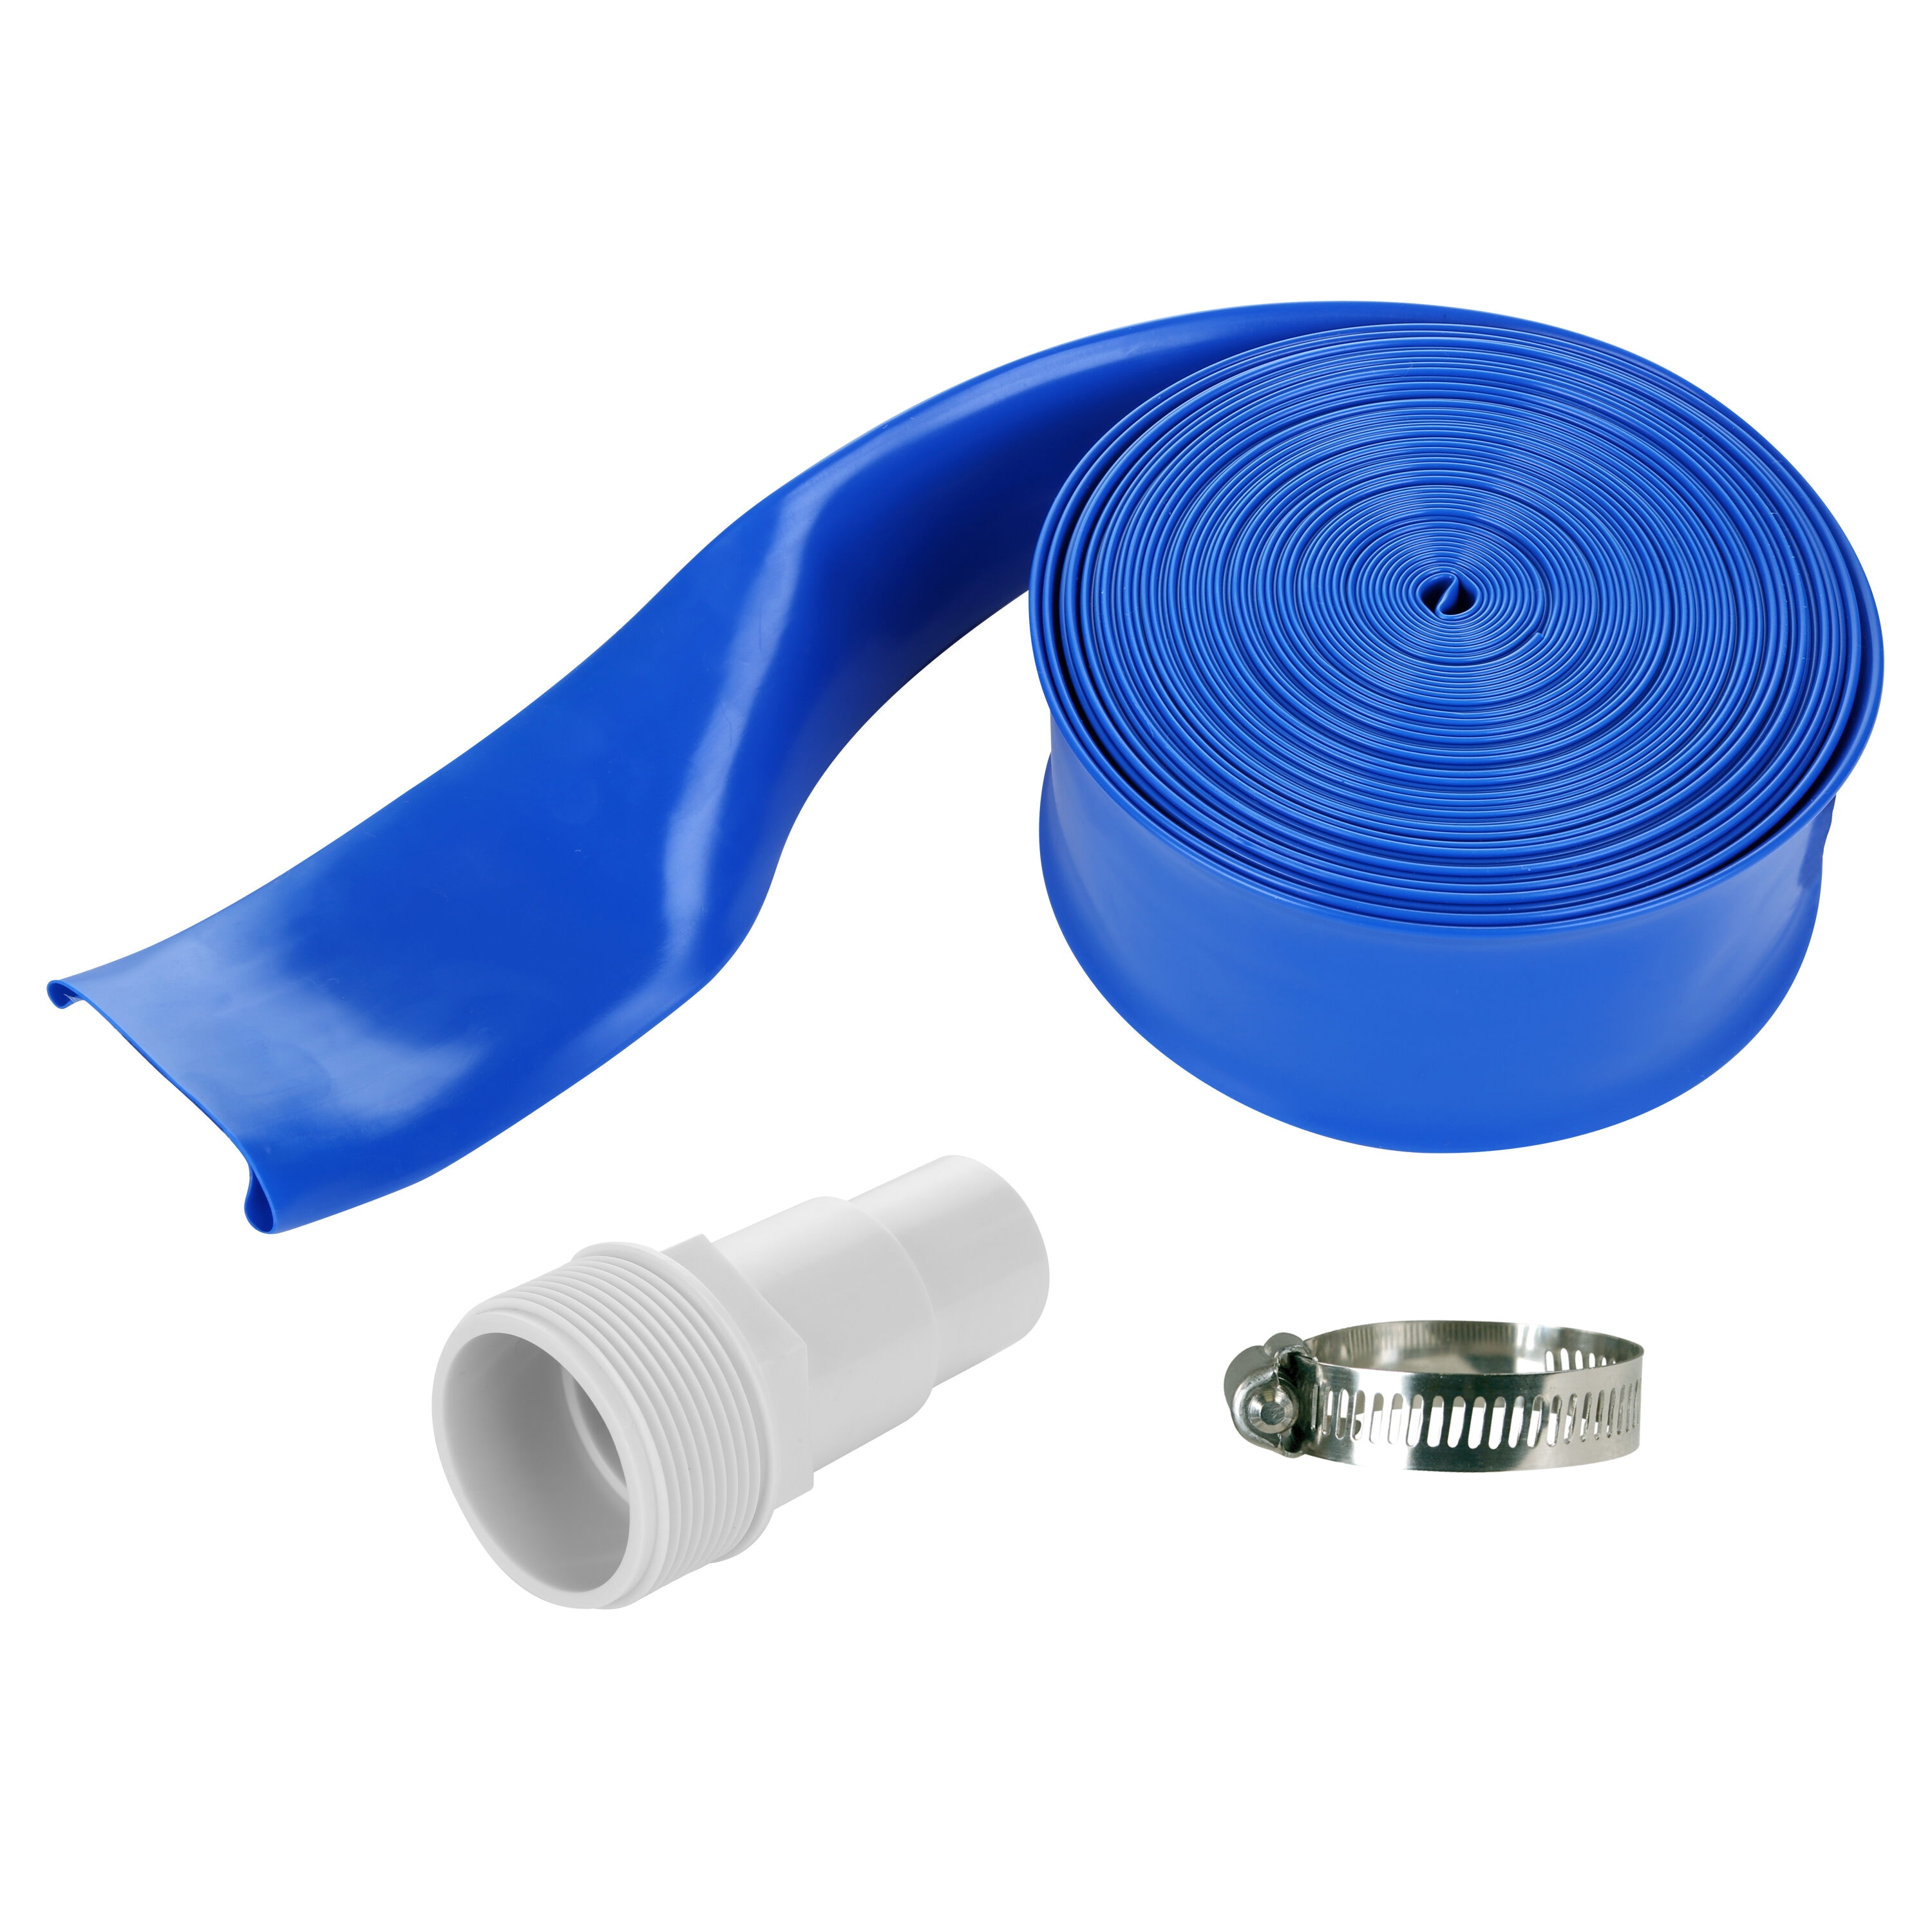 1-1/4 50' Blue PVC Lay-Flat Backwash Hose for Swimming Pools, Heavy Duty  Discharge Hose Reinforced Pool Drain Hose, Weather Resistant Ideal for  Water